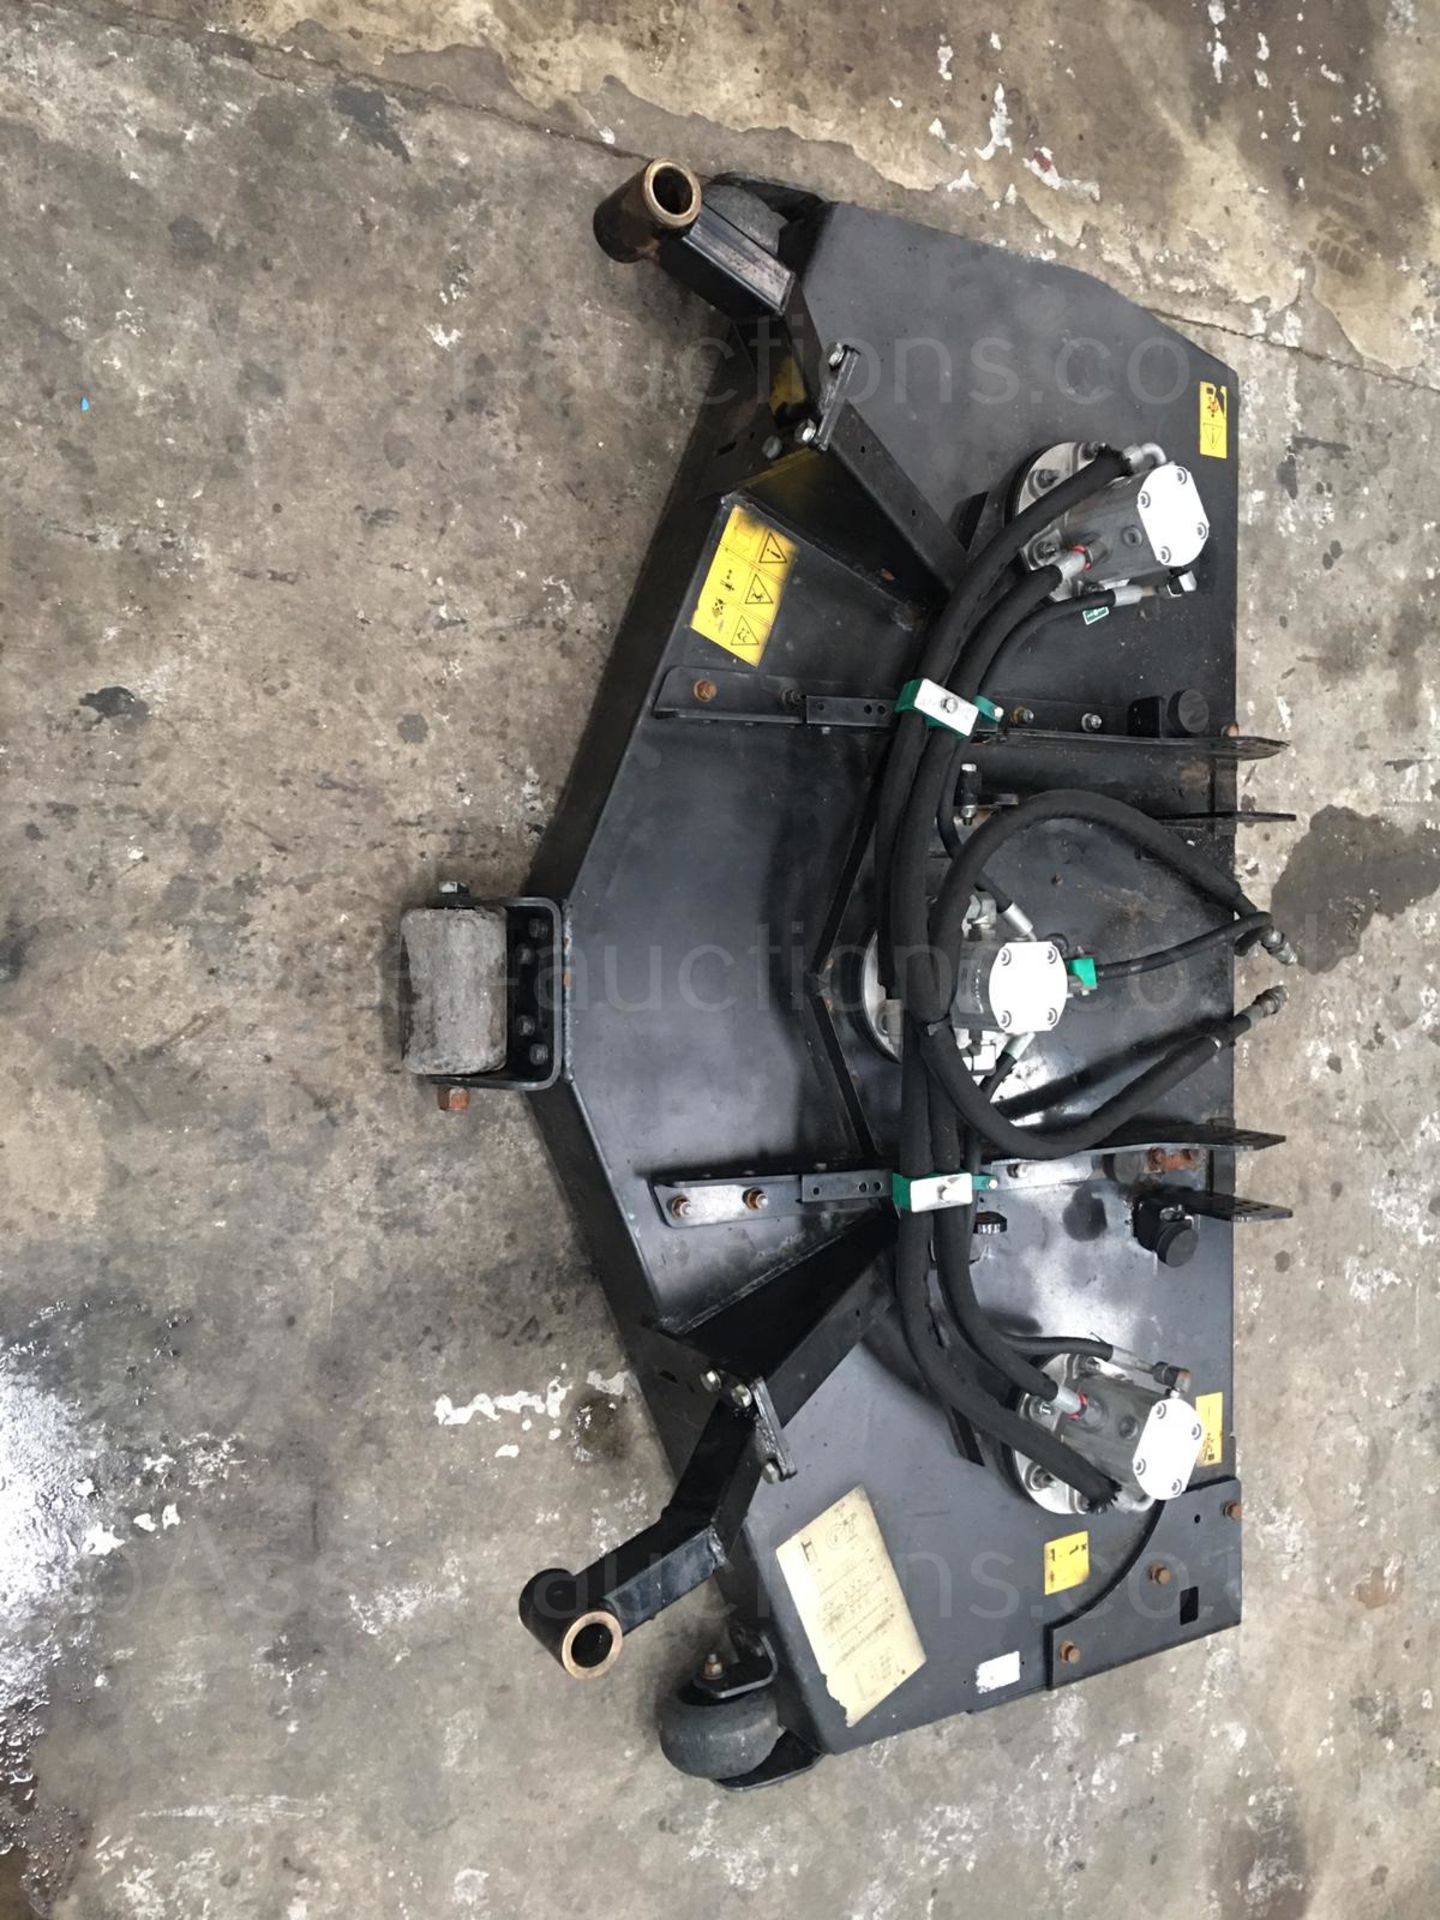 RANSOMES JACOBSEN 5FT HYDRAULIC DECK, IN GOOD WORKING ORDER *NO VAT* - Image 2 of 12